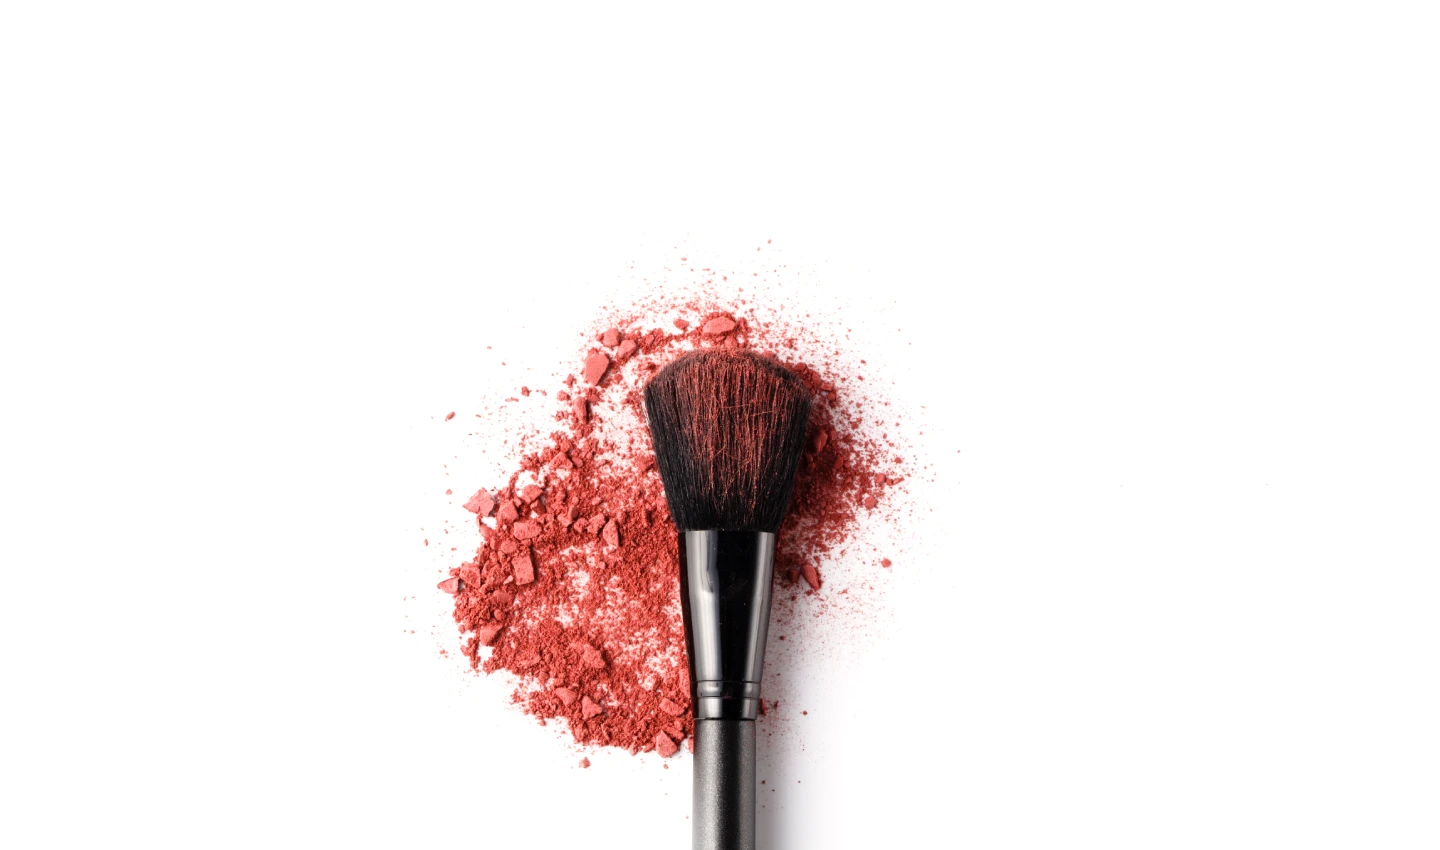 A makeup brush covered in blush, highlighting the artistry and beauty of makeup brushes.